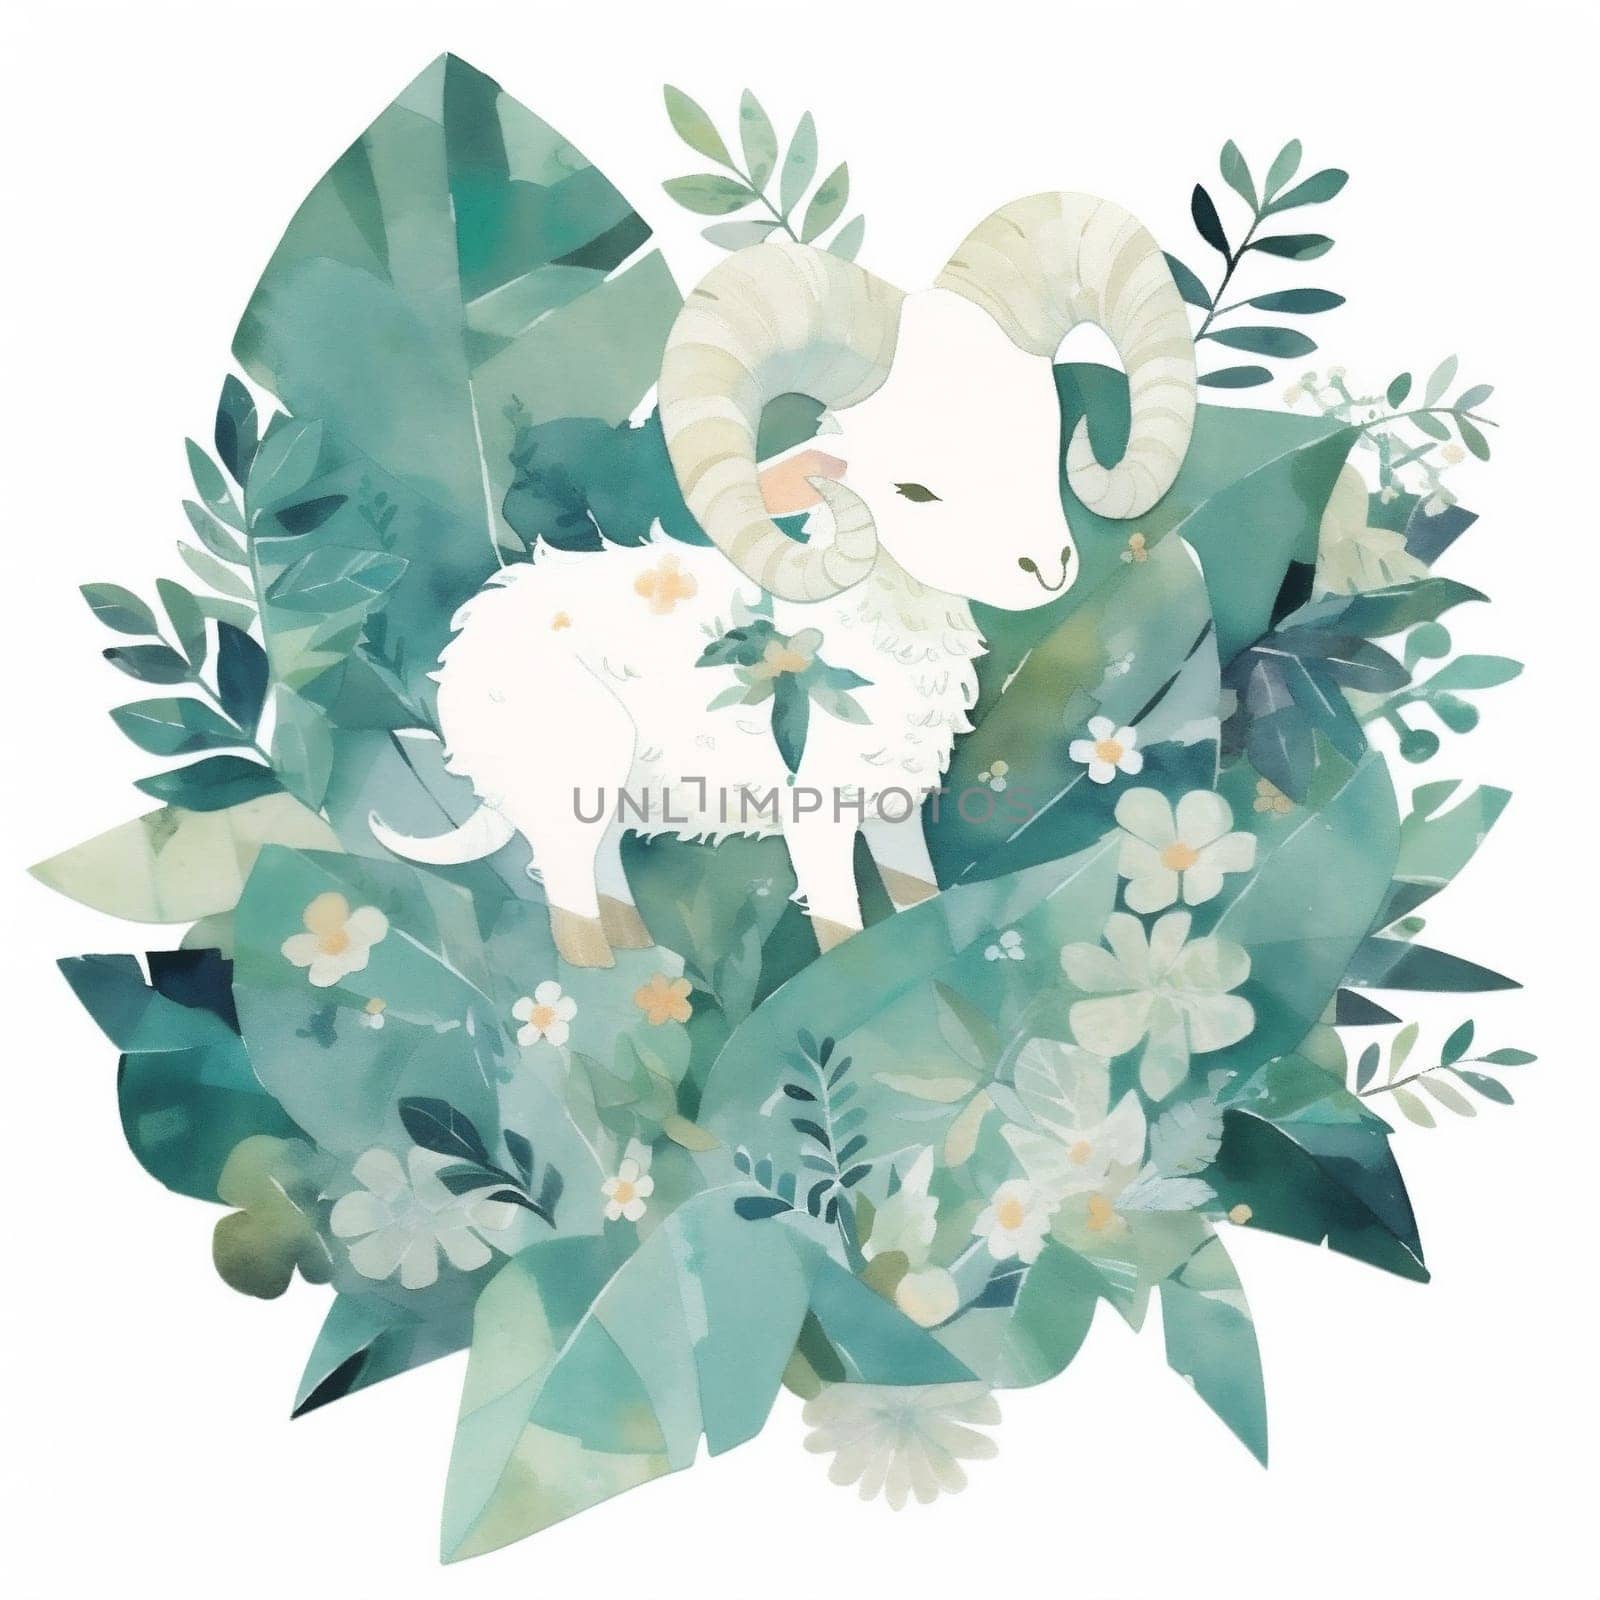 Cute Sheep in Tropical Leaves. Illustration of Ram in Pastel Colors. by Rina_Dozornaya